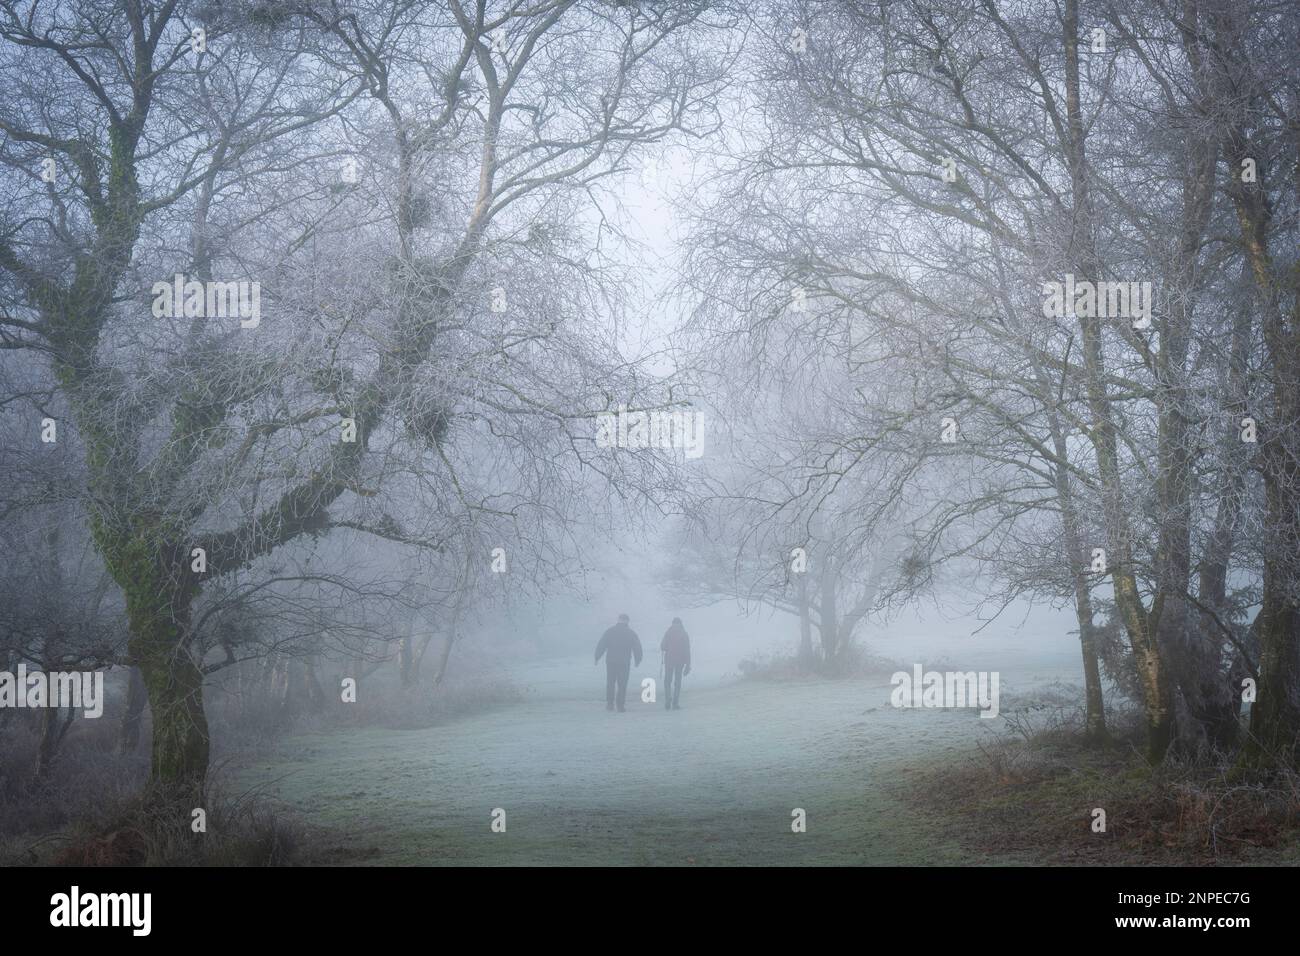 Two mean walking on a tree-lined path on a foggy and frosty morning. Stock Photo